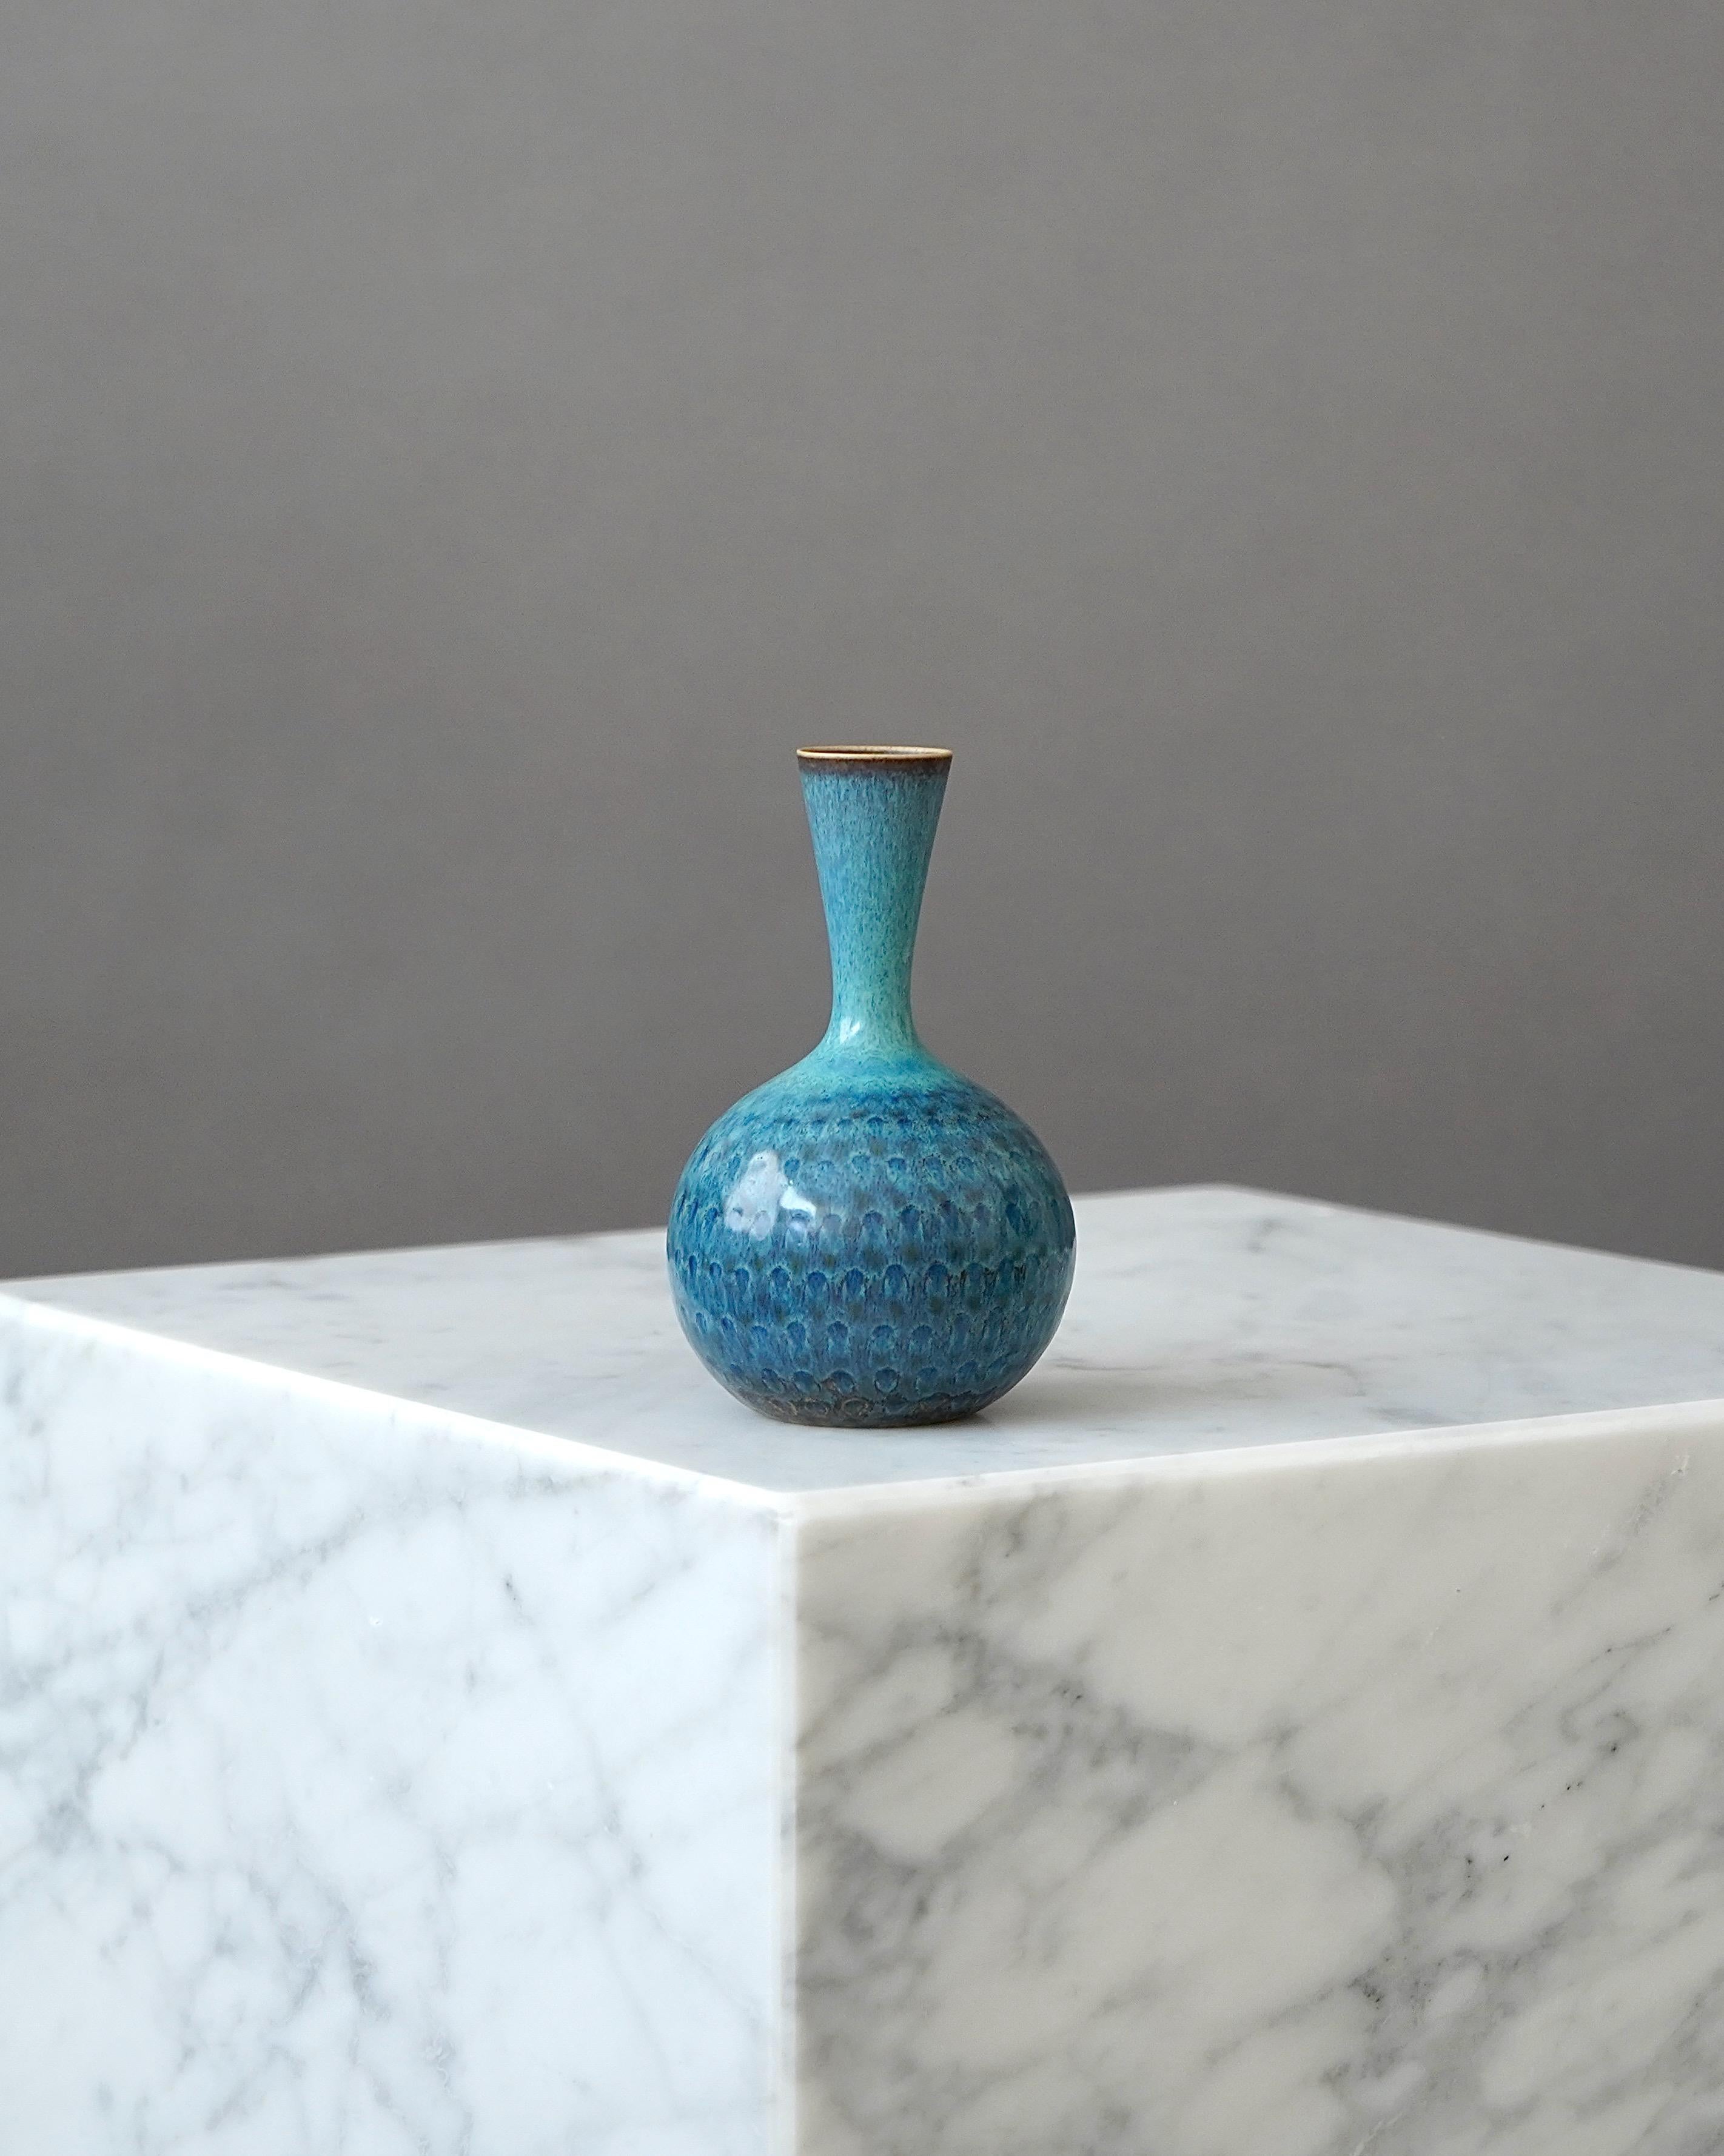 A beautiful and unique stoneware vase with amazing glaze.
Made by Stig Lindberg in Gustavsberg Studio, Sweden. 1963.

Excellent condition.
Incised 